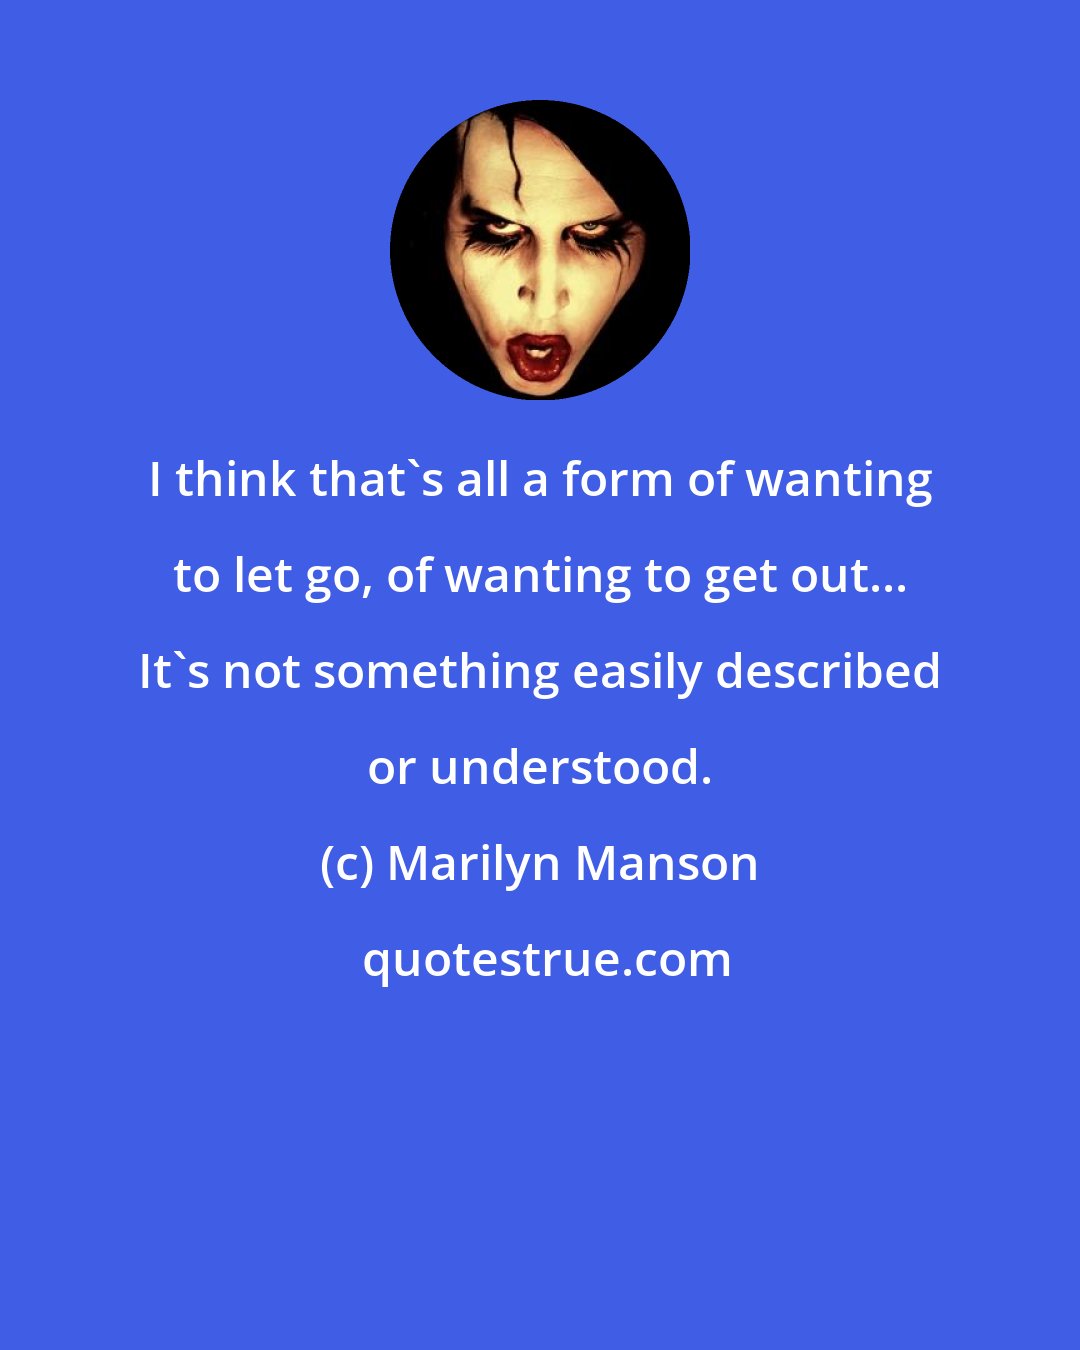 Marilyn Manson: I think that's all a form of wanting to let go, of wanting to get out... It's not something easily described or understood.